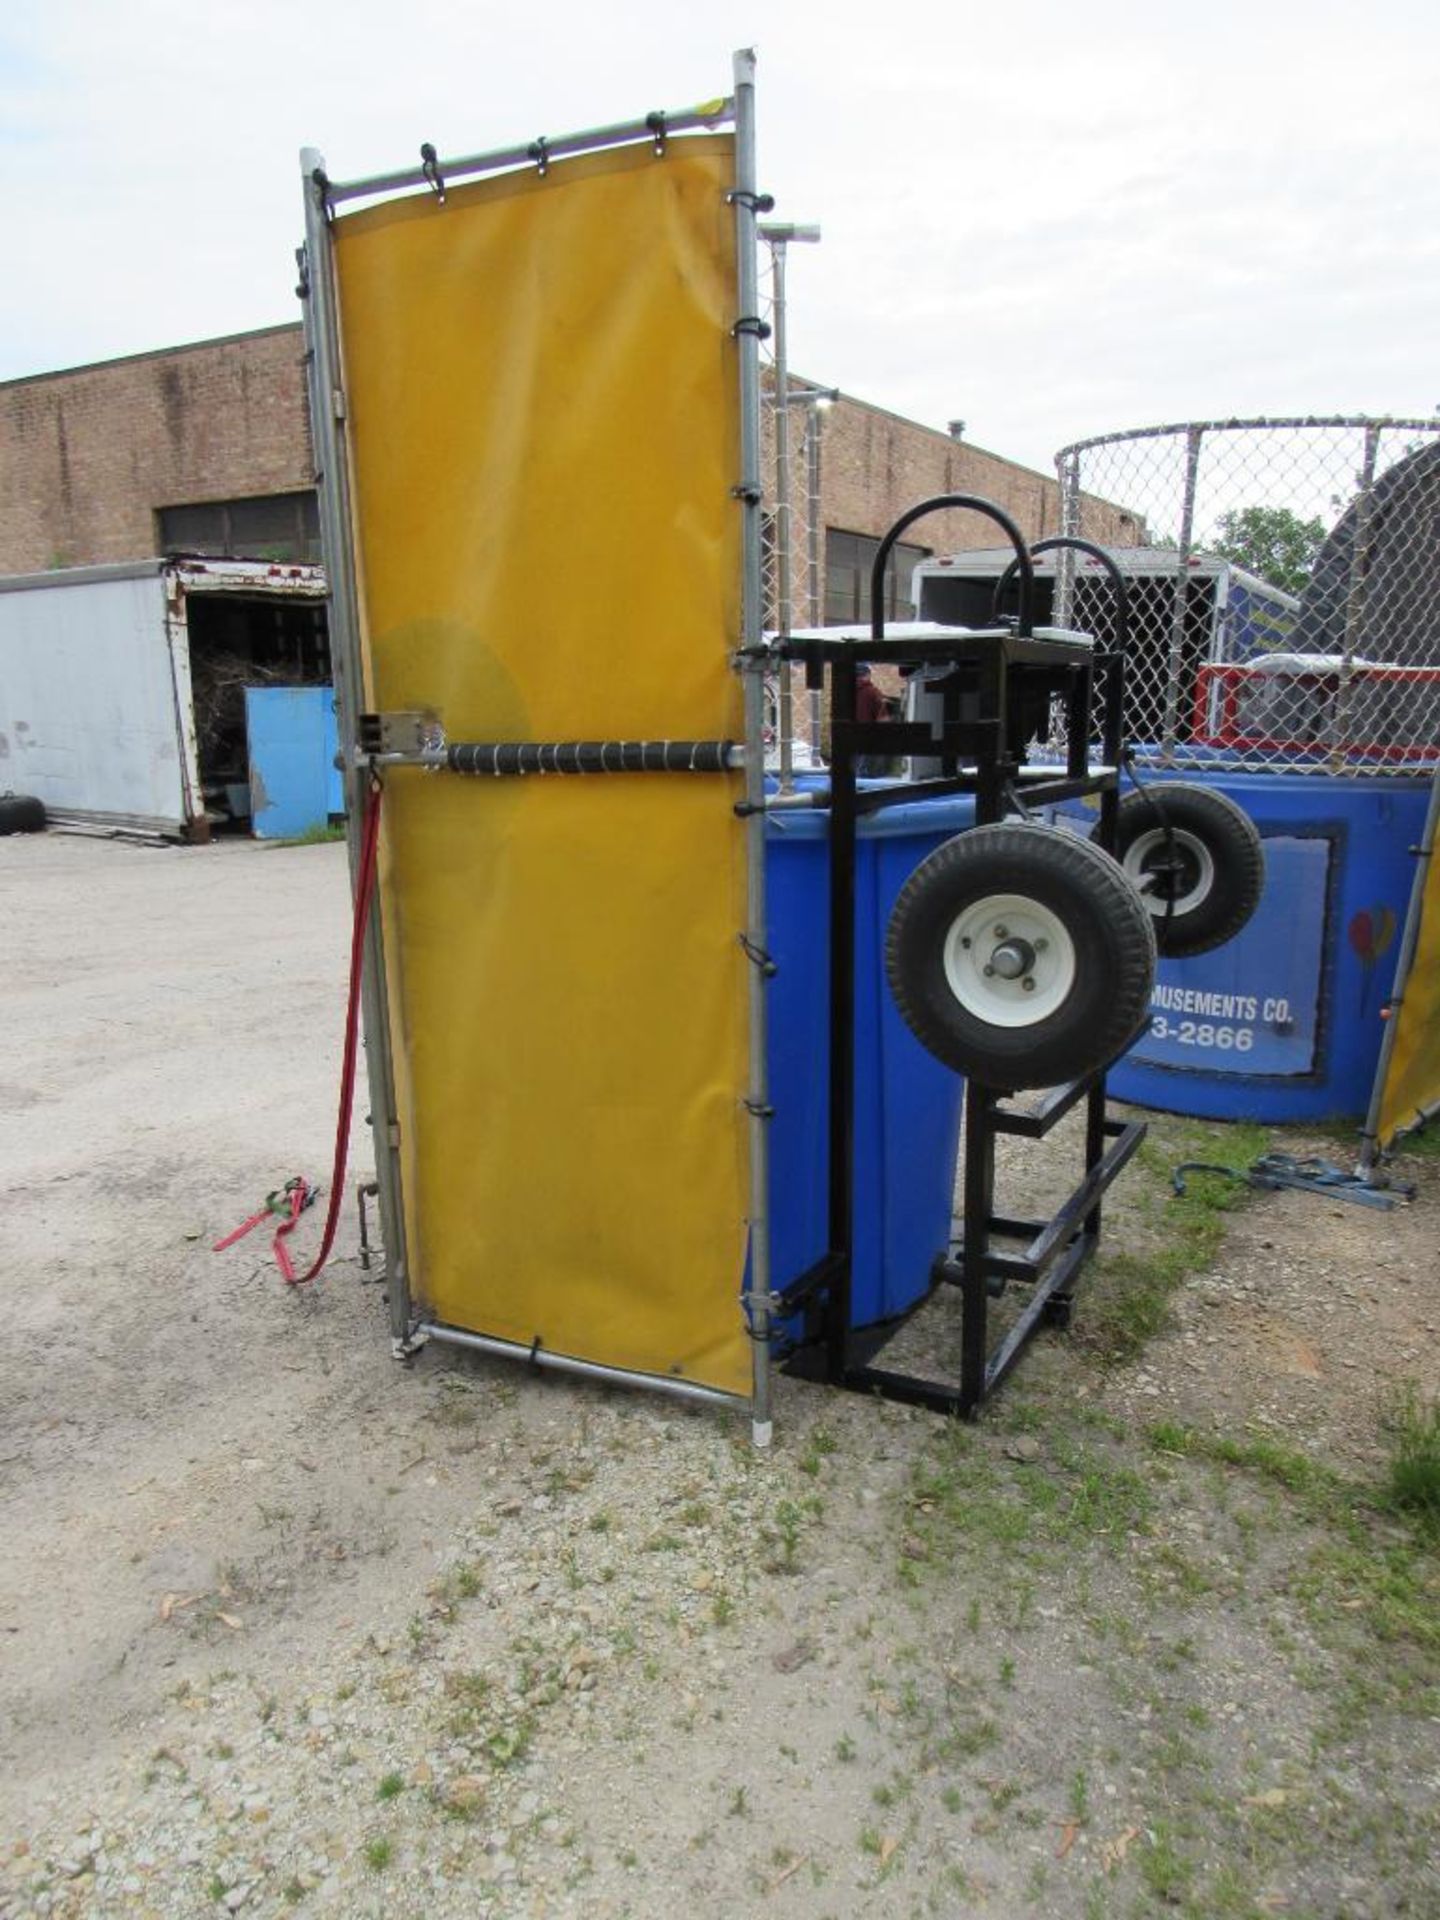 Dunk Tank Trailer mounted - includes bucket of balls, target and activation arm. See Lot 24A Misc. D - Image 4 of 4